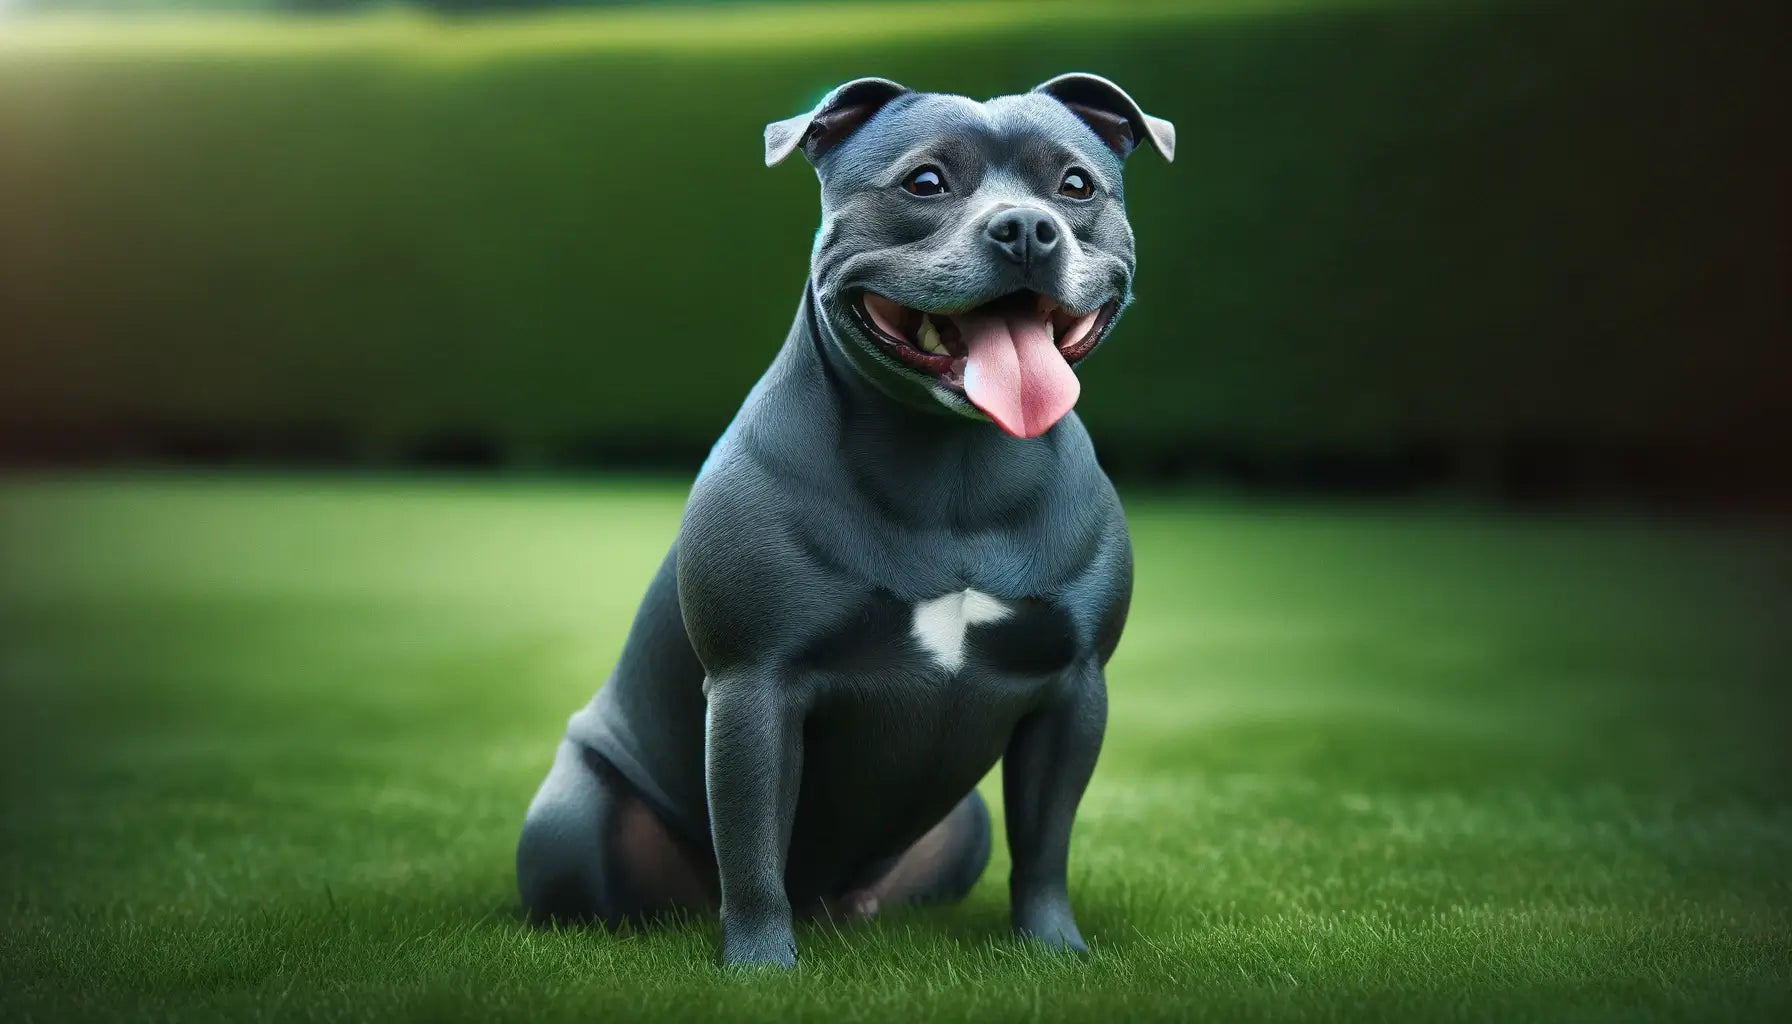 Blue Staffy sitting on a lush green lawn panting lightly with its tongue out, suggesting recent play or exercise.